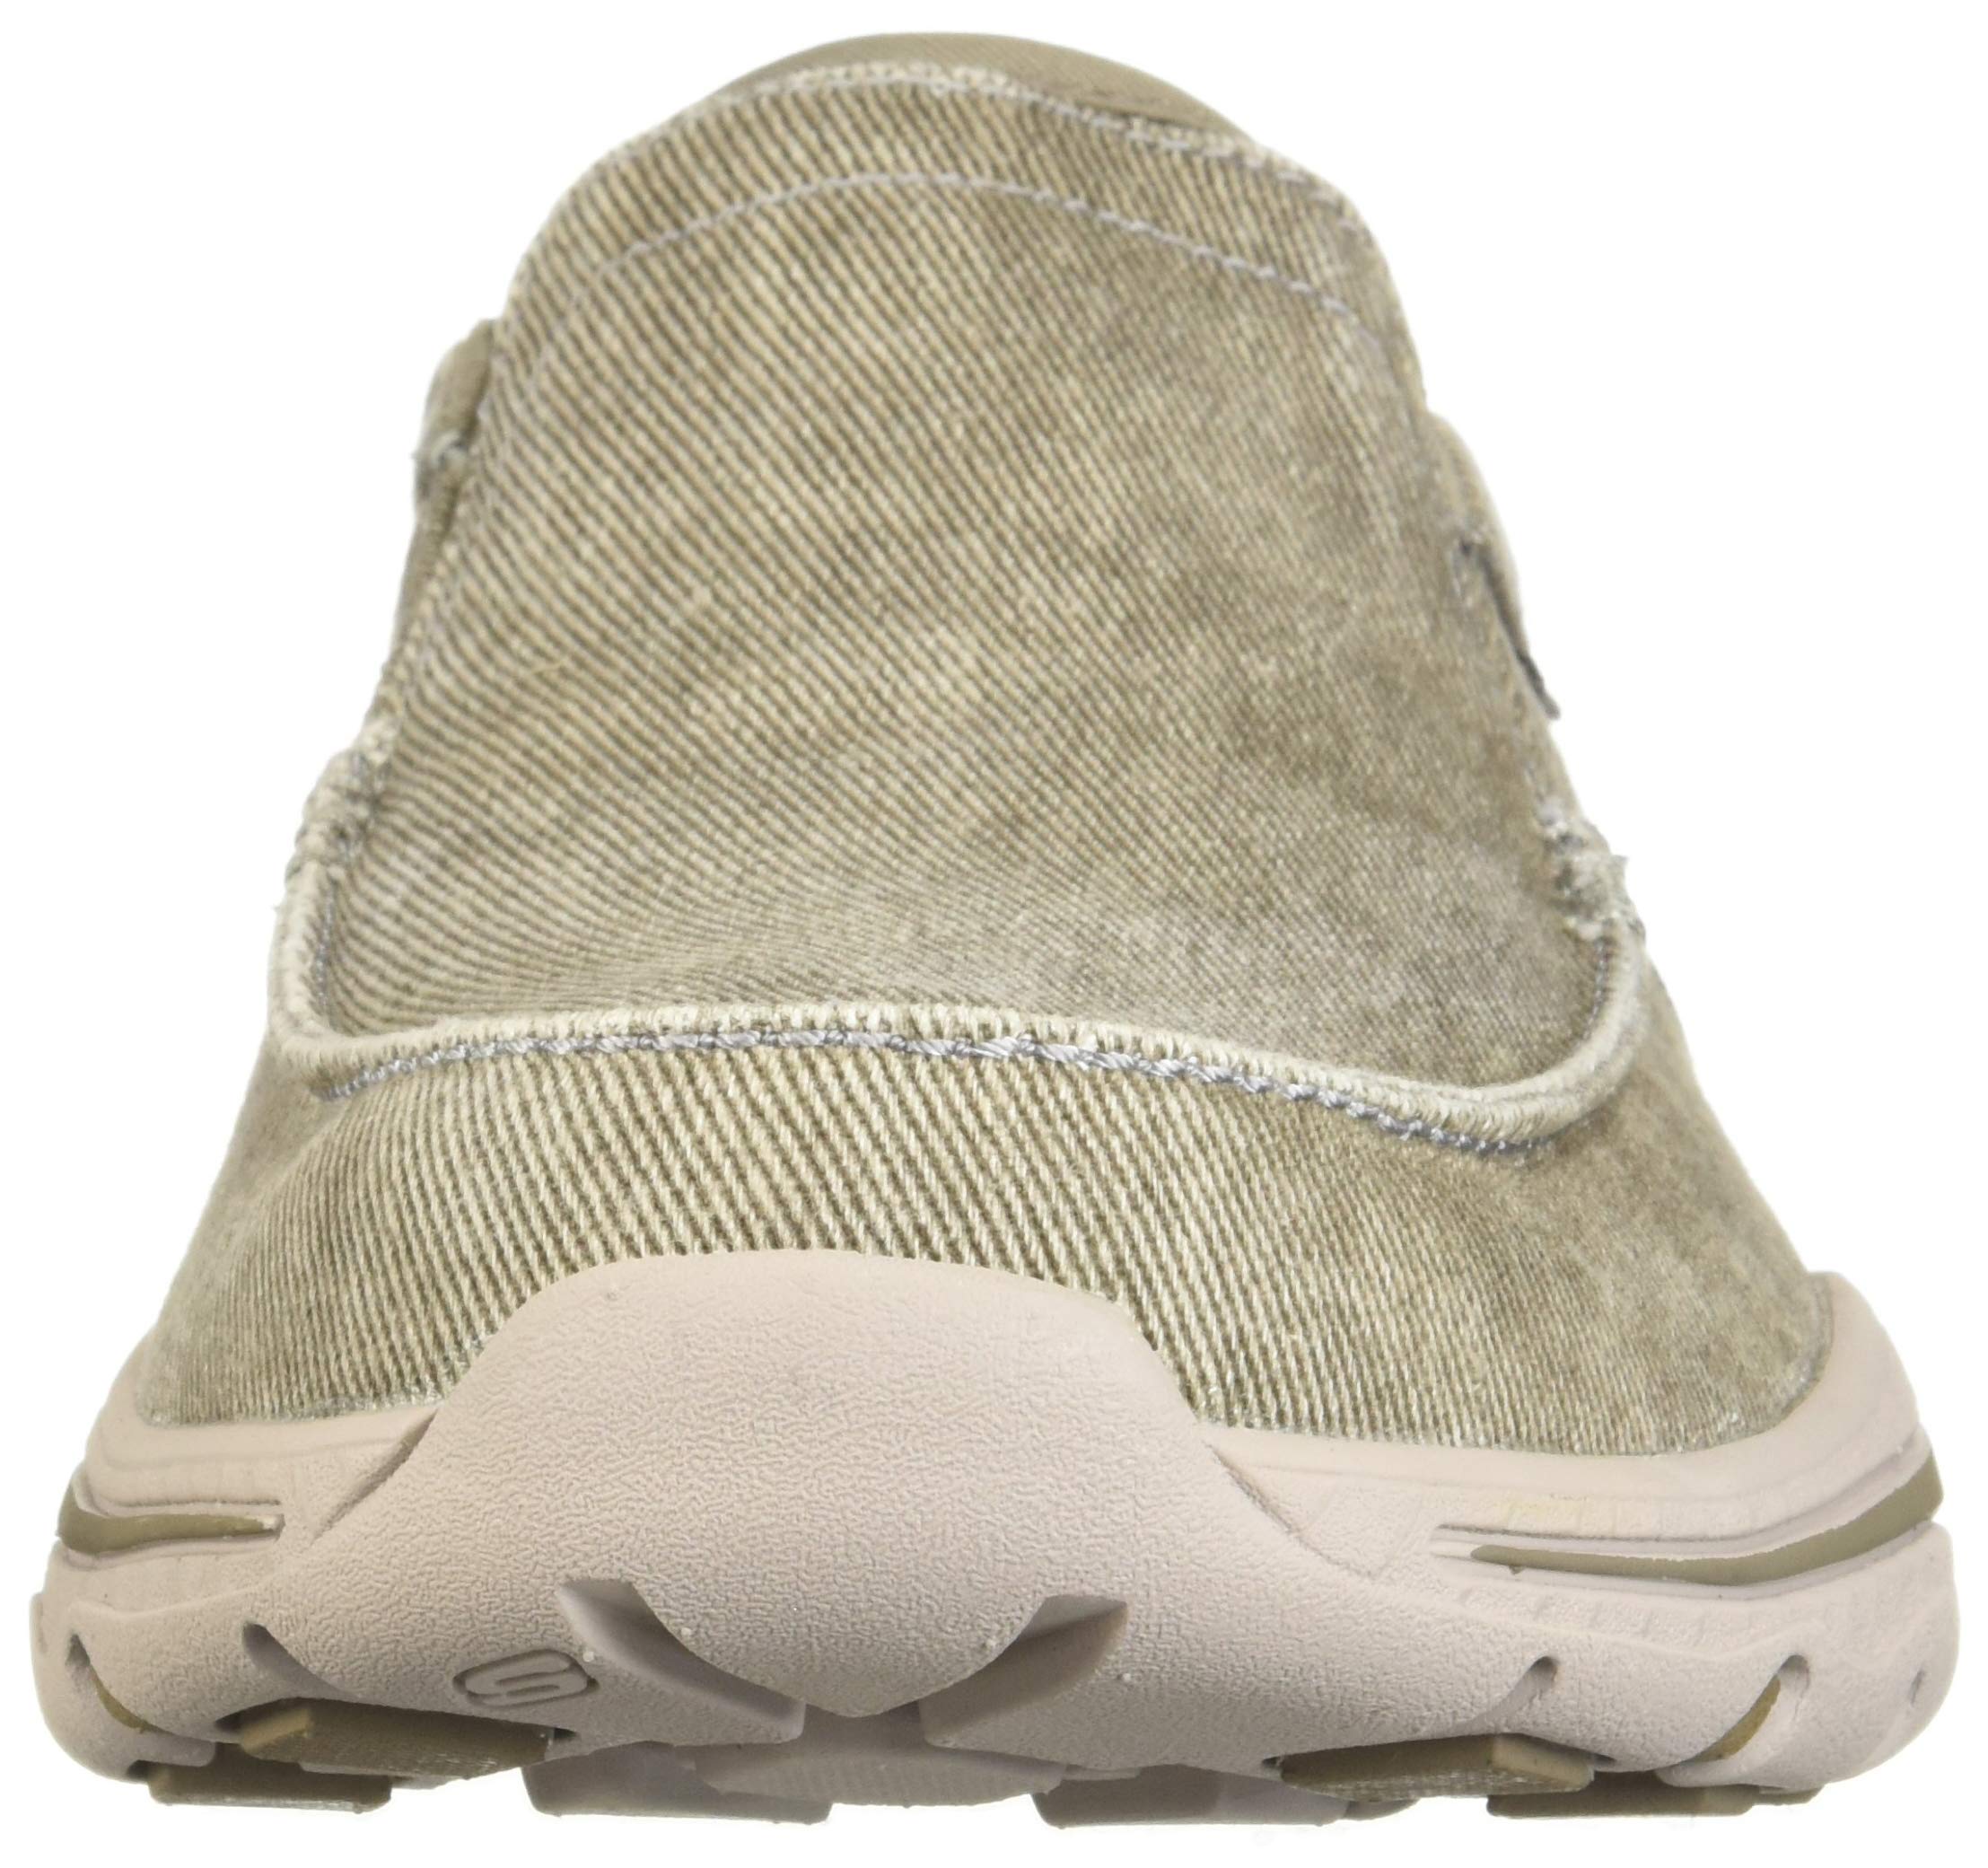 Skechers Men's Relaxed Fit-Creston-Moseco